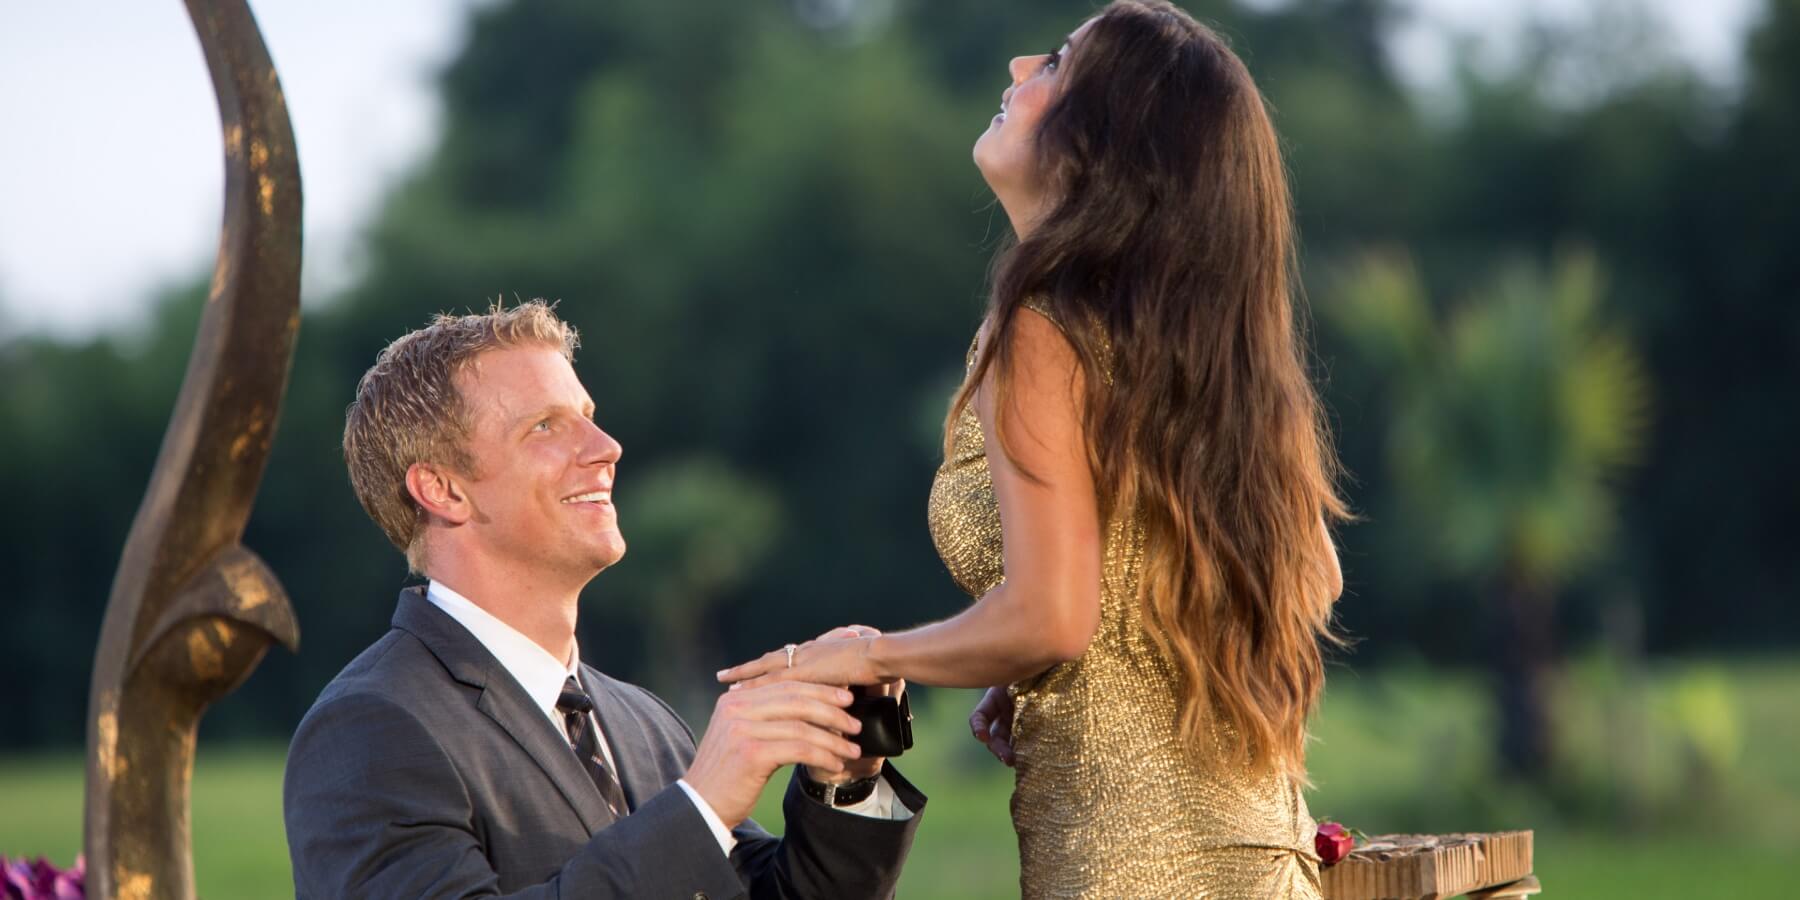 Sean Lowe and Catherine Giudici during the engagement on 'The Bachelor' Season 17